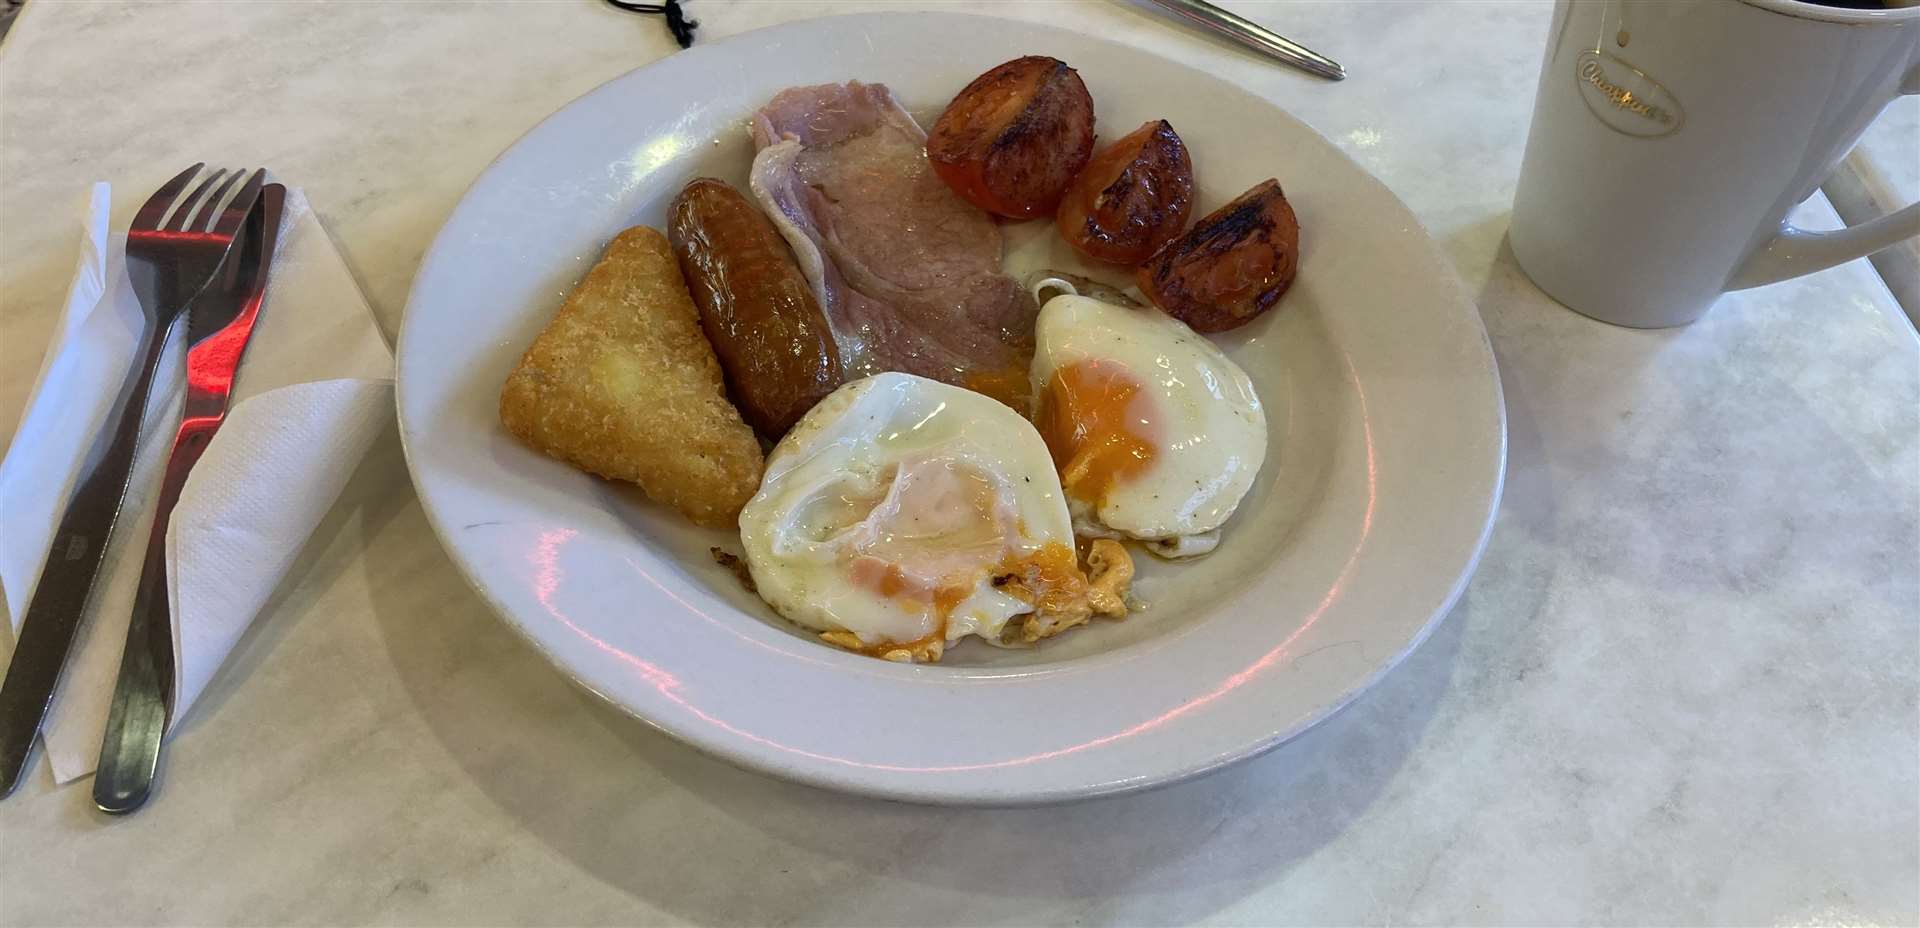 A full English minus beans and mushrooms with a large black coffee